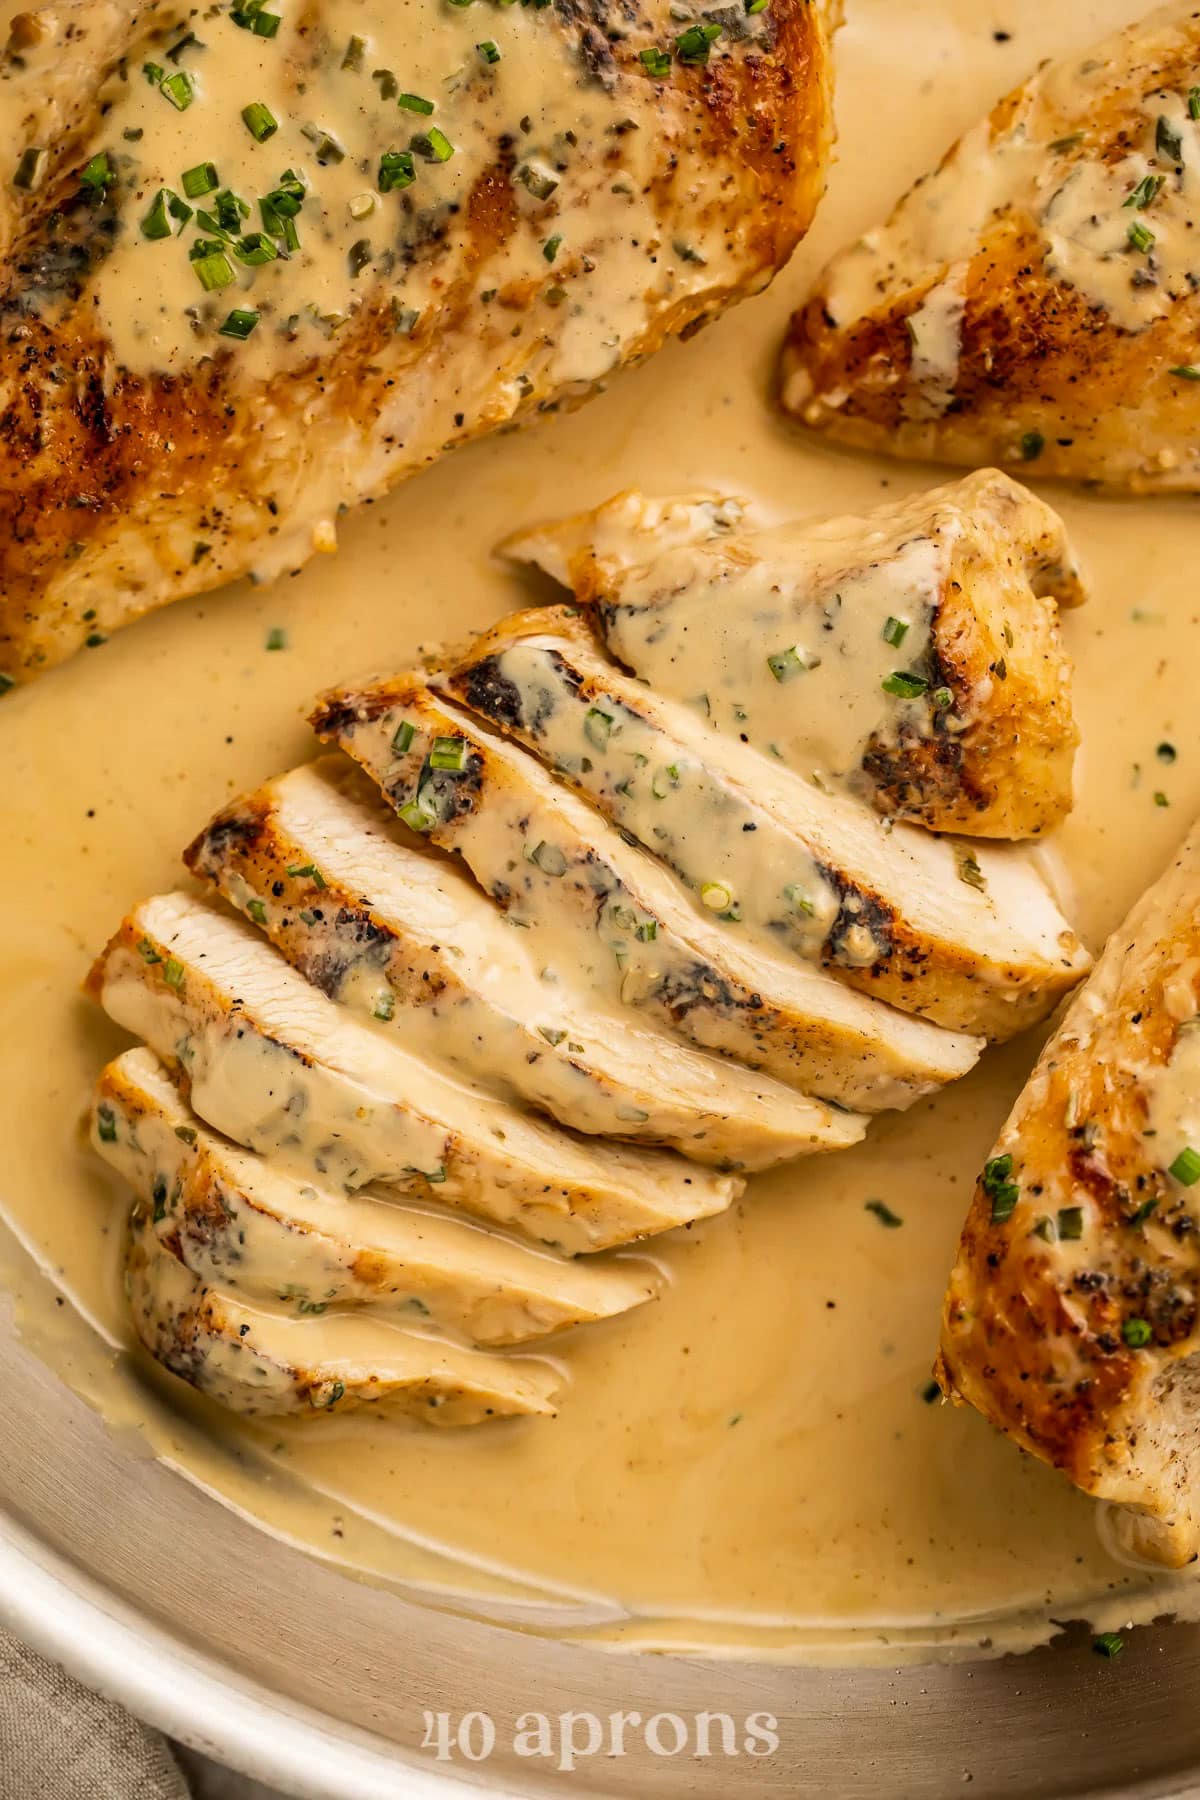 Close-up of a sliced chicken breast sitting in and topped with a creamy Boursin cheese sauce.